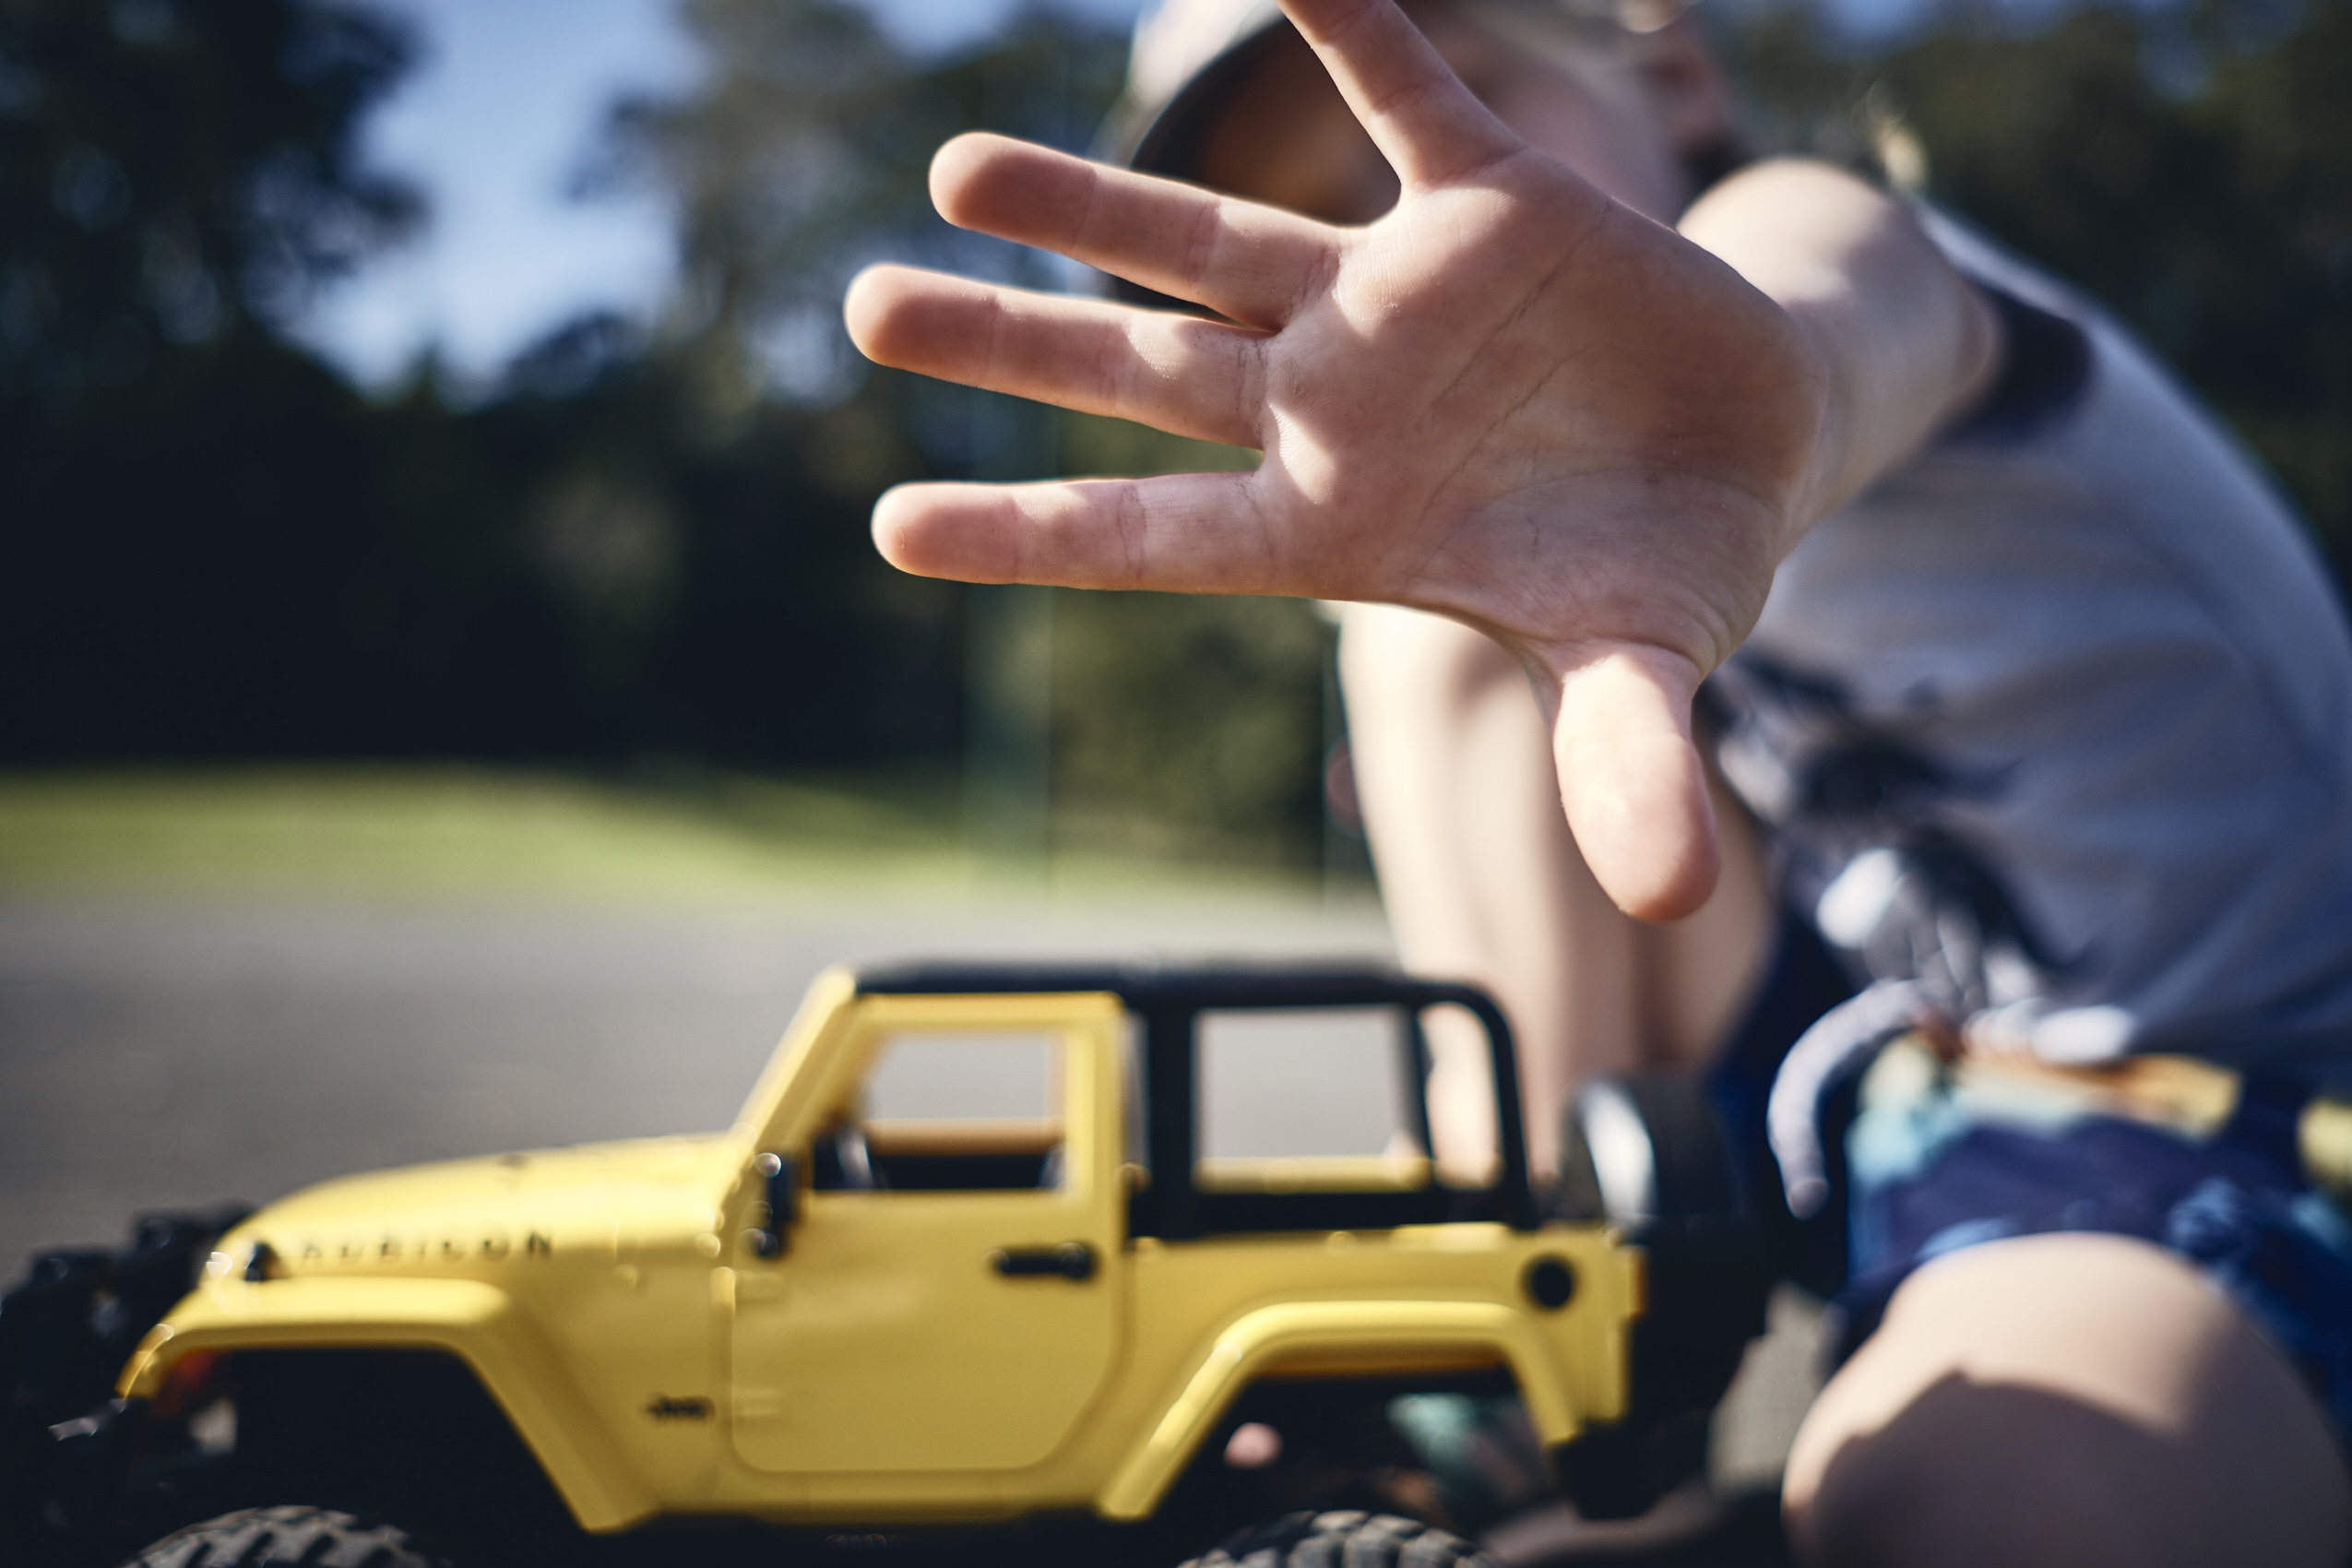 Lockdown • Yellow Truck & Young Boy with Open Palm  • Lifestyle & Portrait Photography